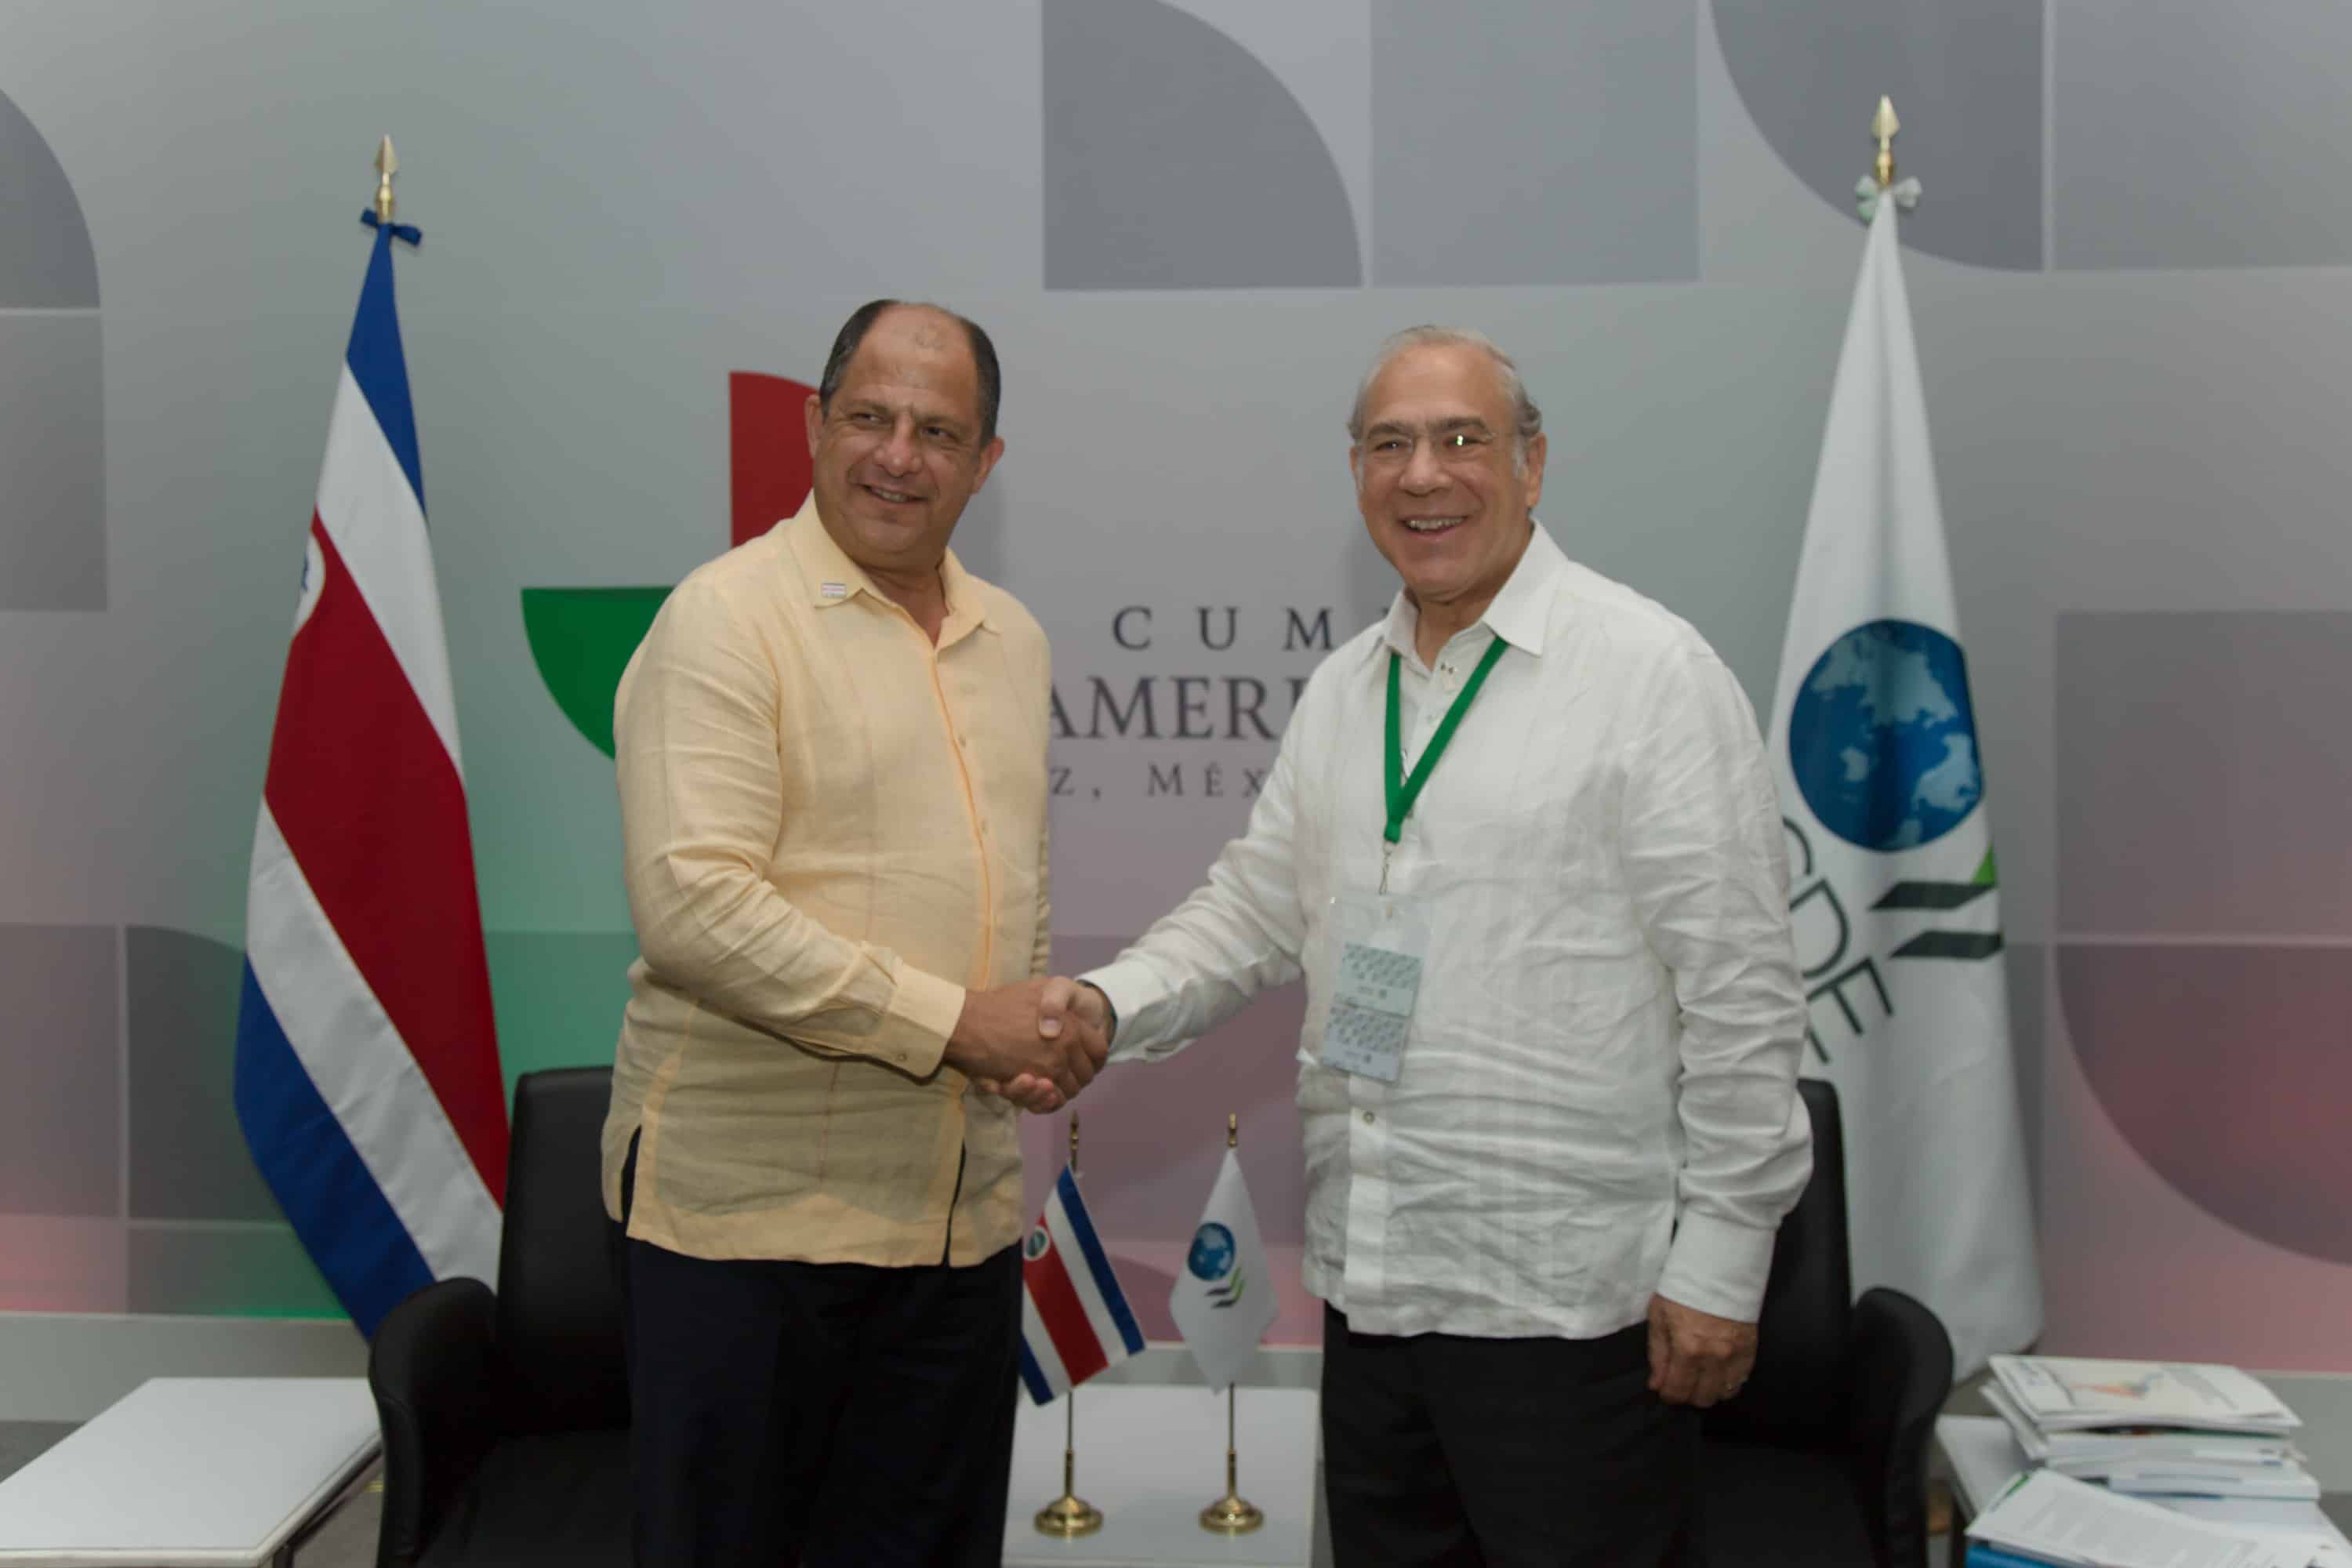 President Luis Guillermo Solís shakes hands with OECD Secretary-General Angel Gurría during the Ibero-American Summit in Mexico in December 2014.